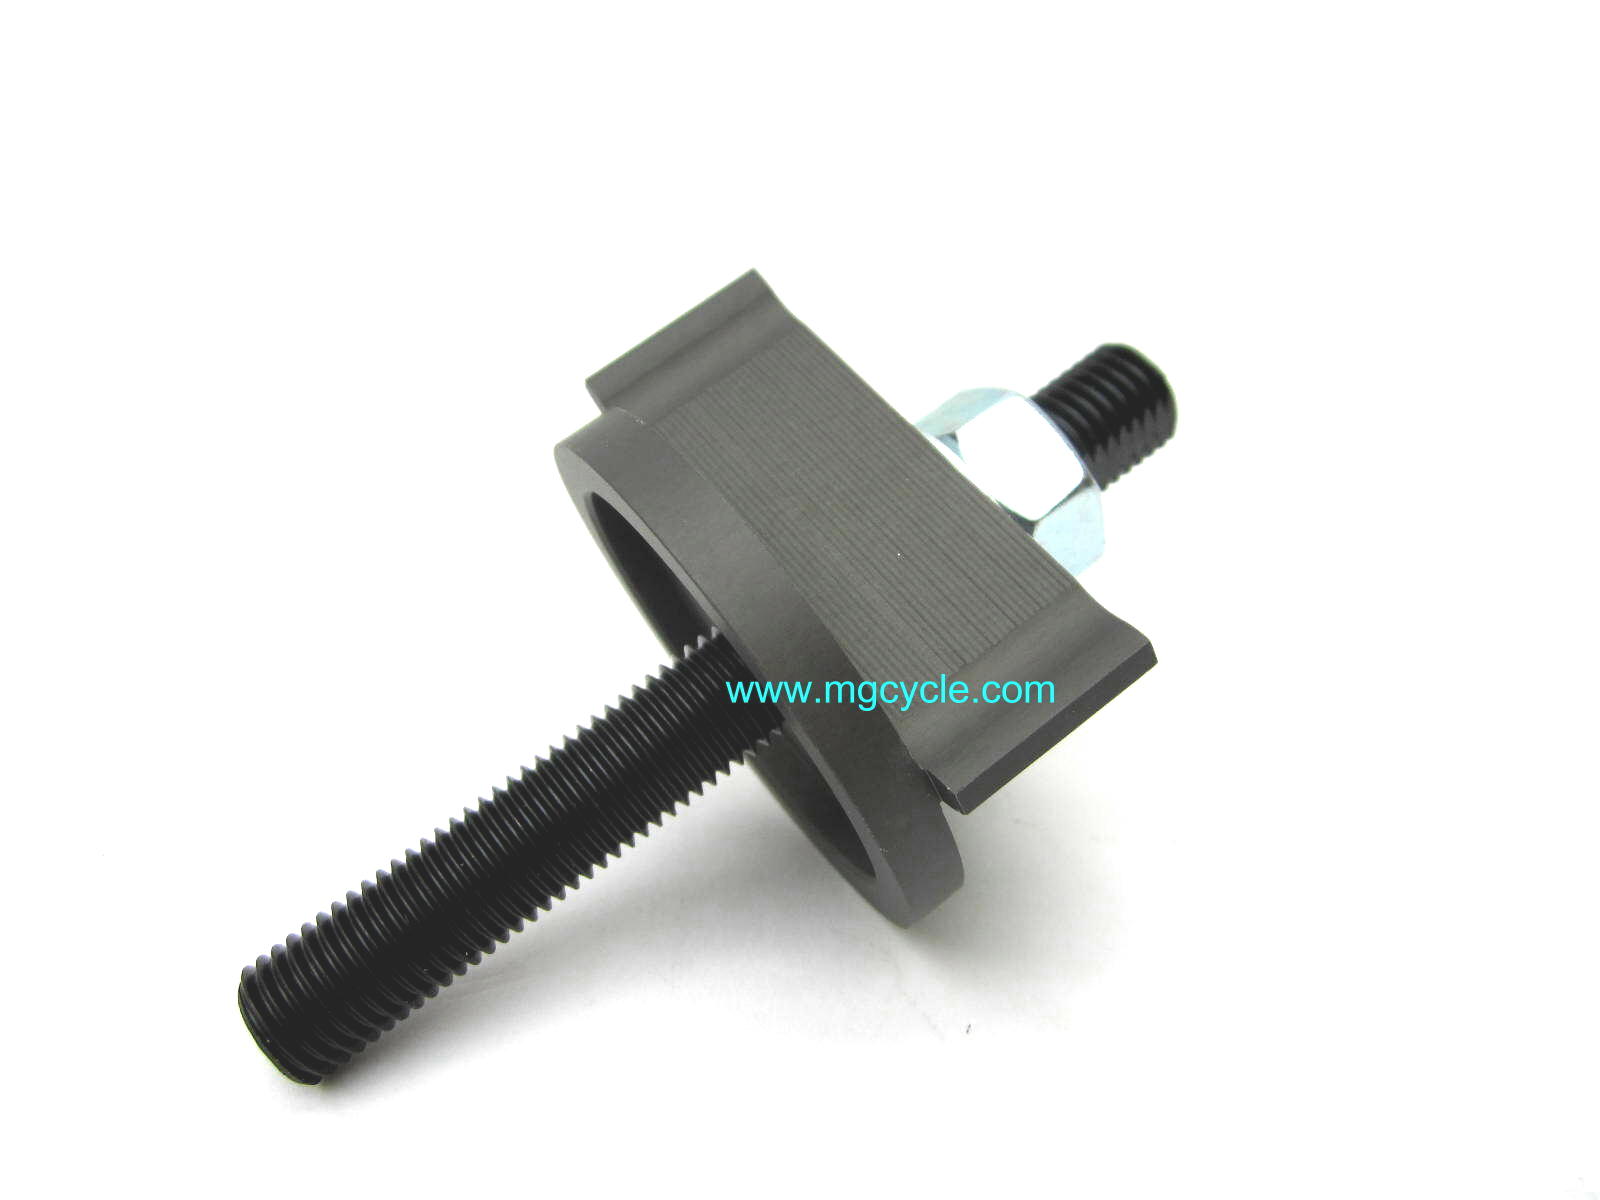 Clutch alignment and installation tool, fits 2mm and 4mm spline